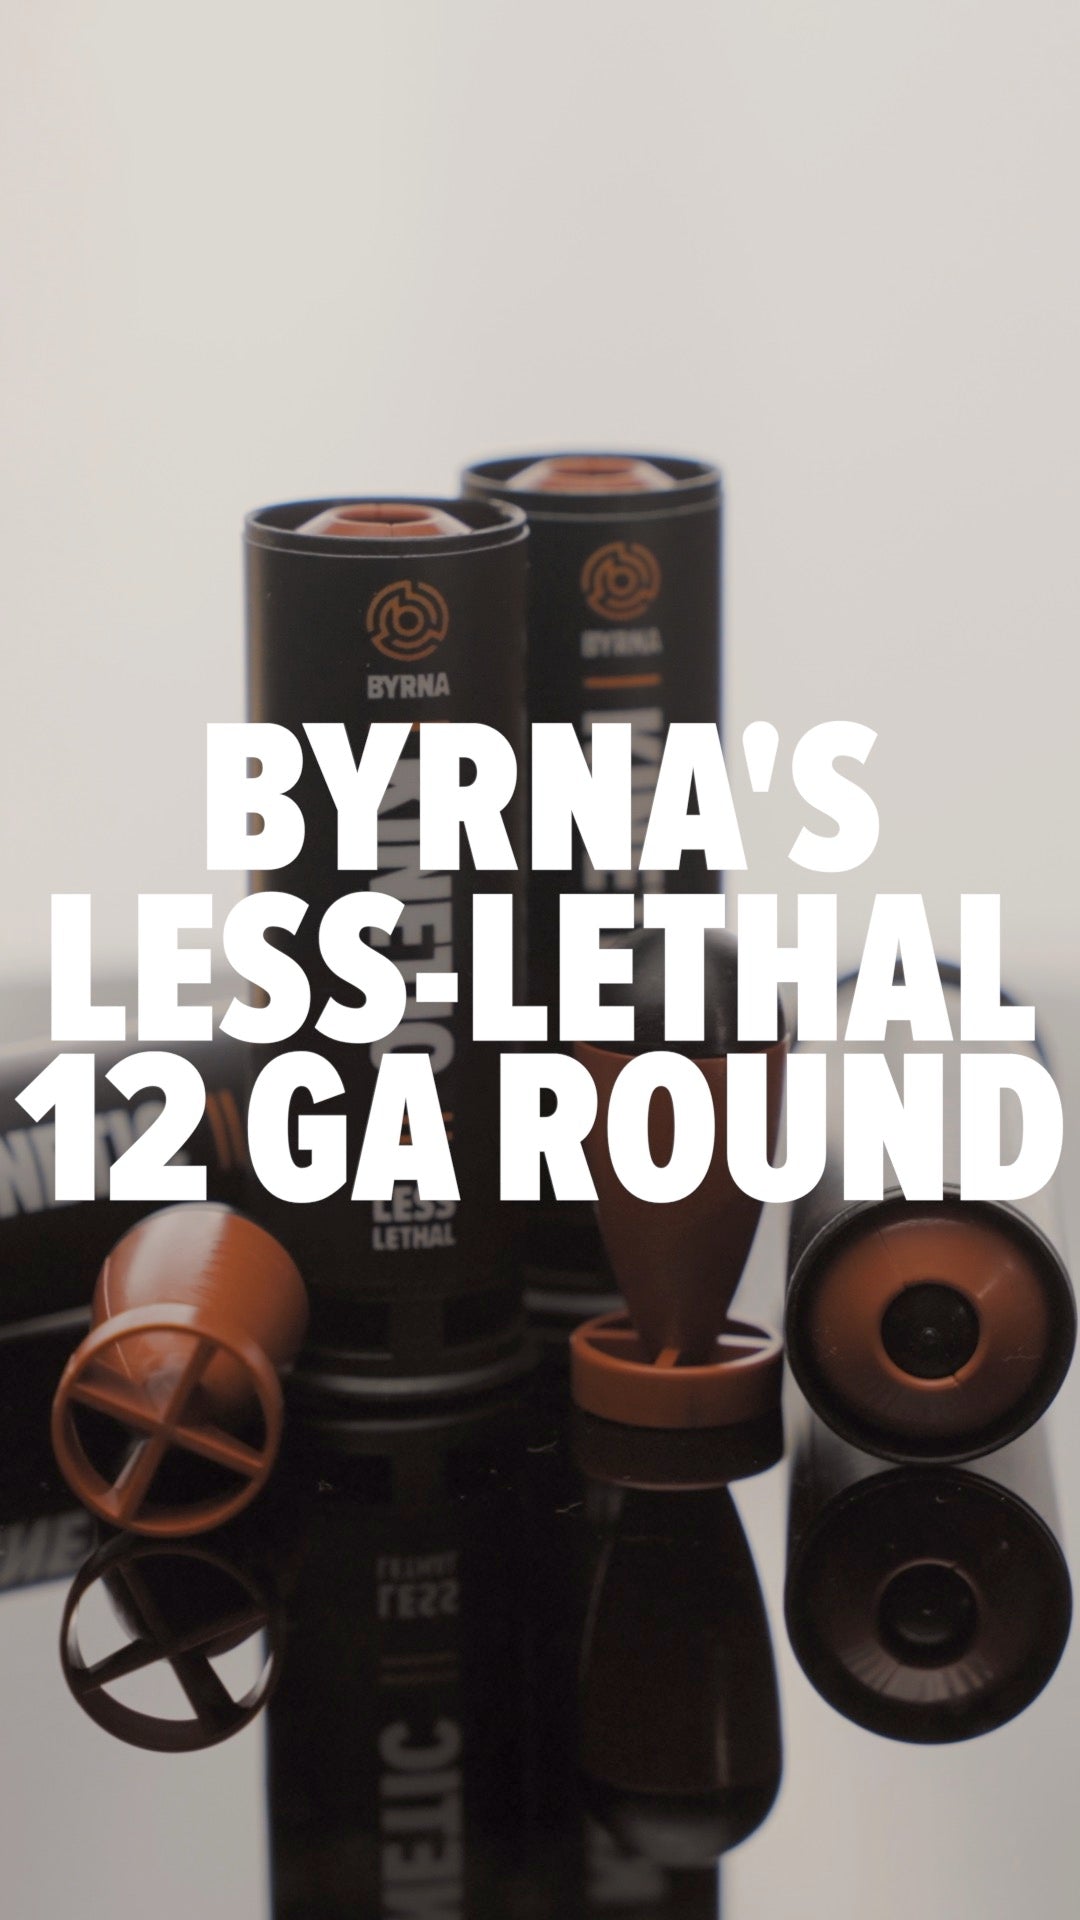 Byrna's Less-Lethal 12 GA Round: Devastating Stopping Power Without the Legal Consequences